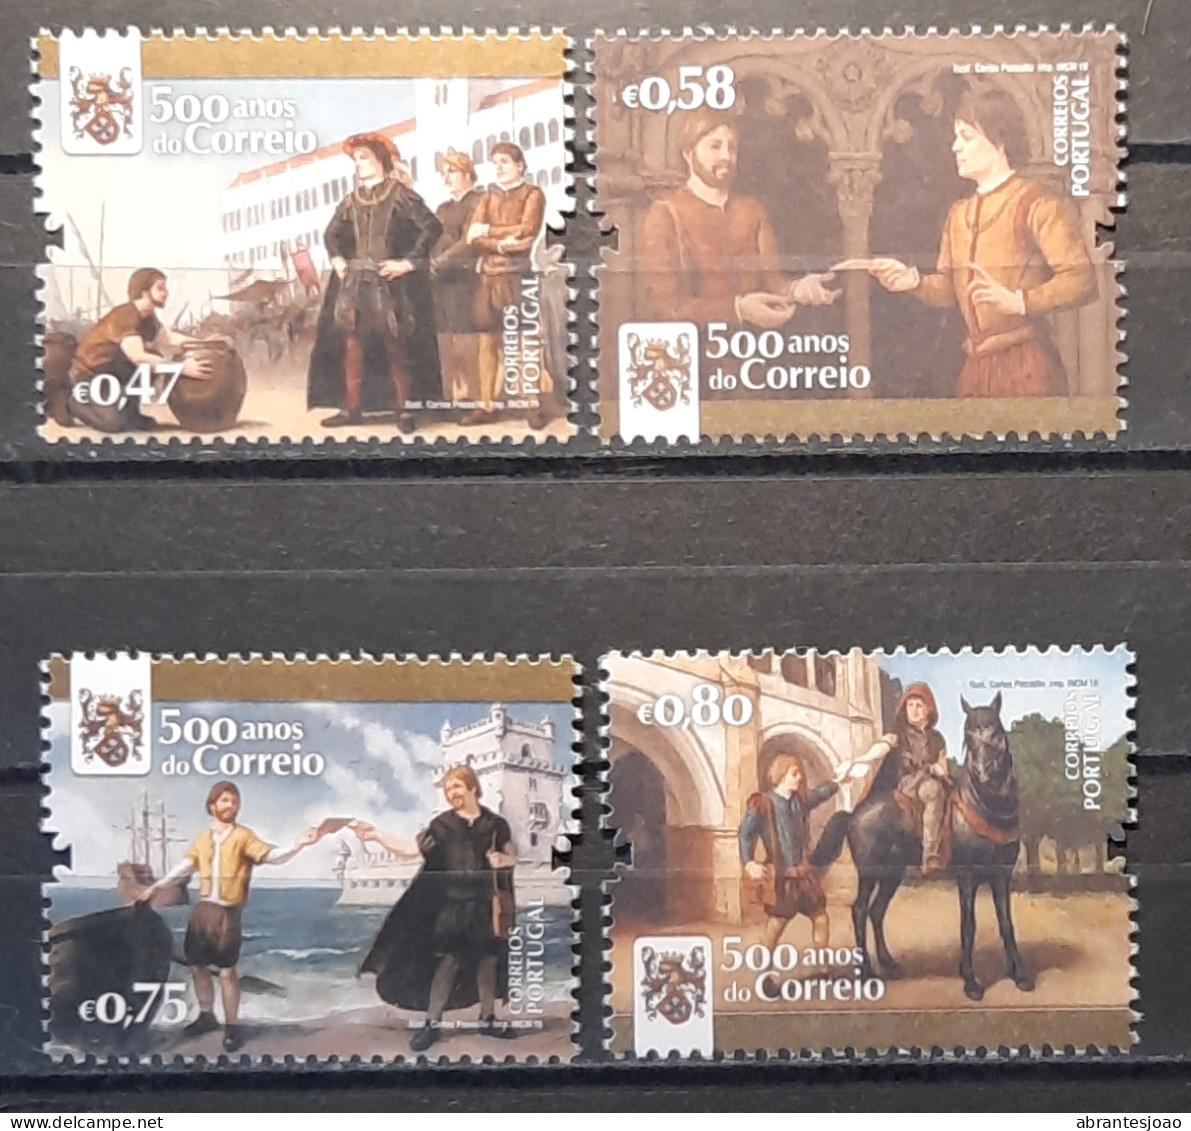 2016 - Portugal - MNH - 500 Years Of Mail In Portugal - 1st Group - 4 Stamps + Souvenir Sheet Of 1 Stamp - Neufs